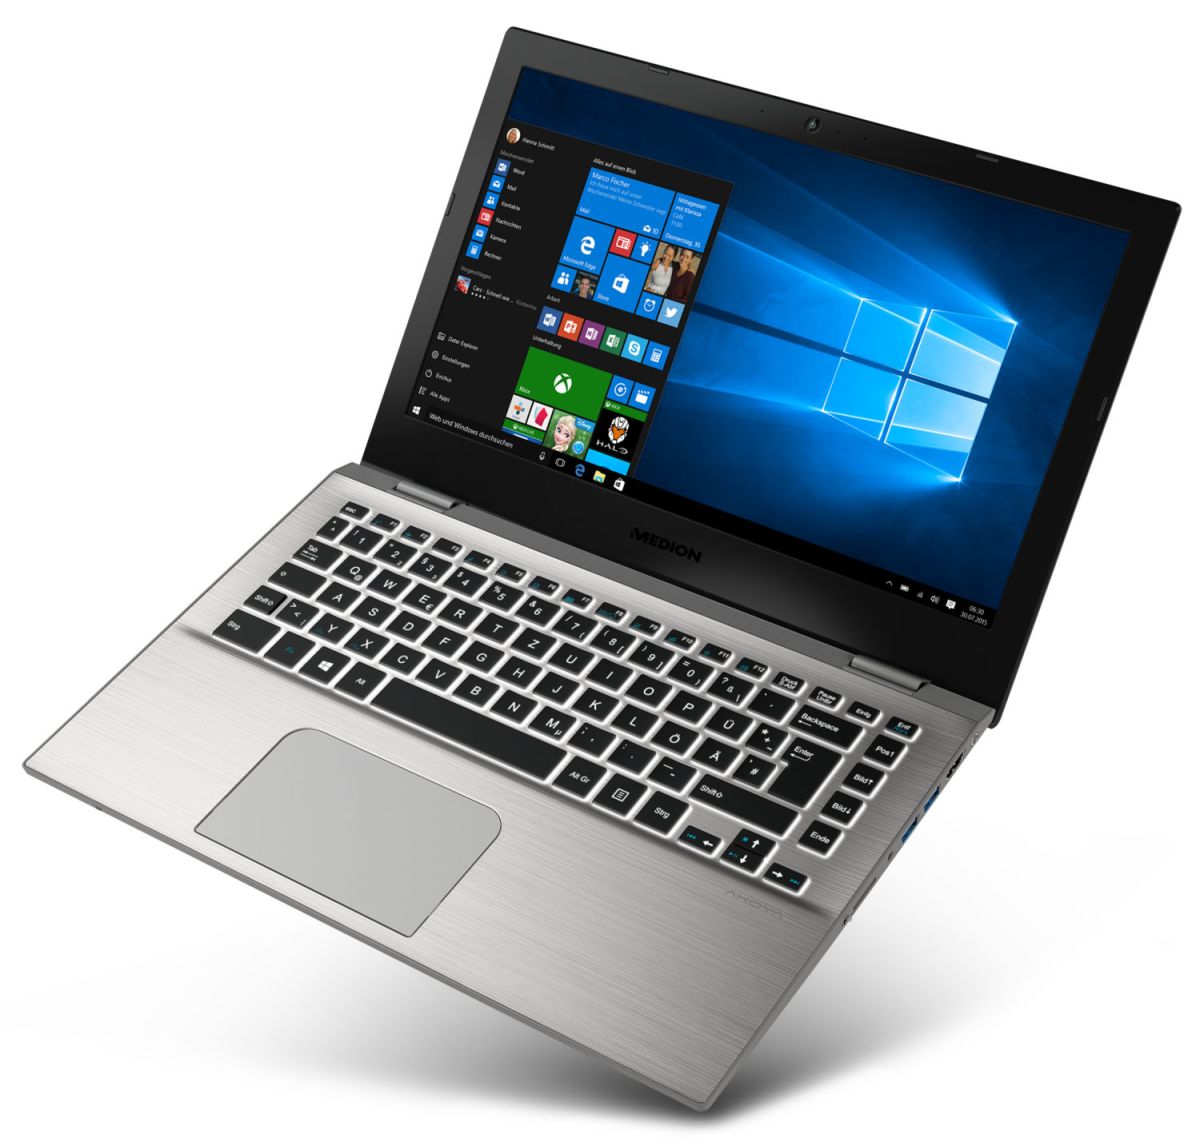 MEDION AKOYA S3409 - 30022352 laptop specifications